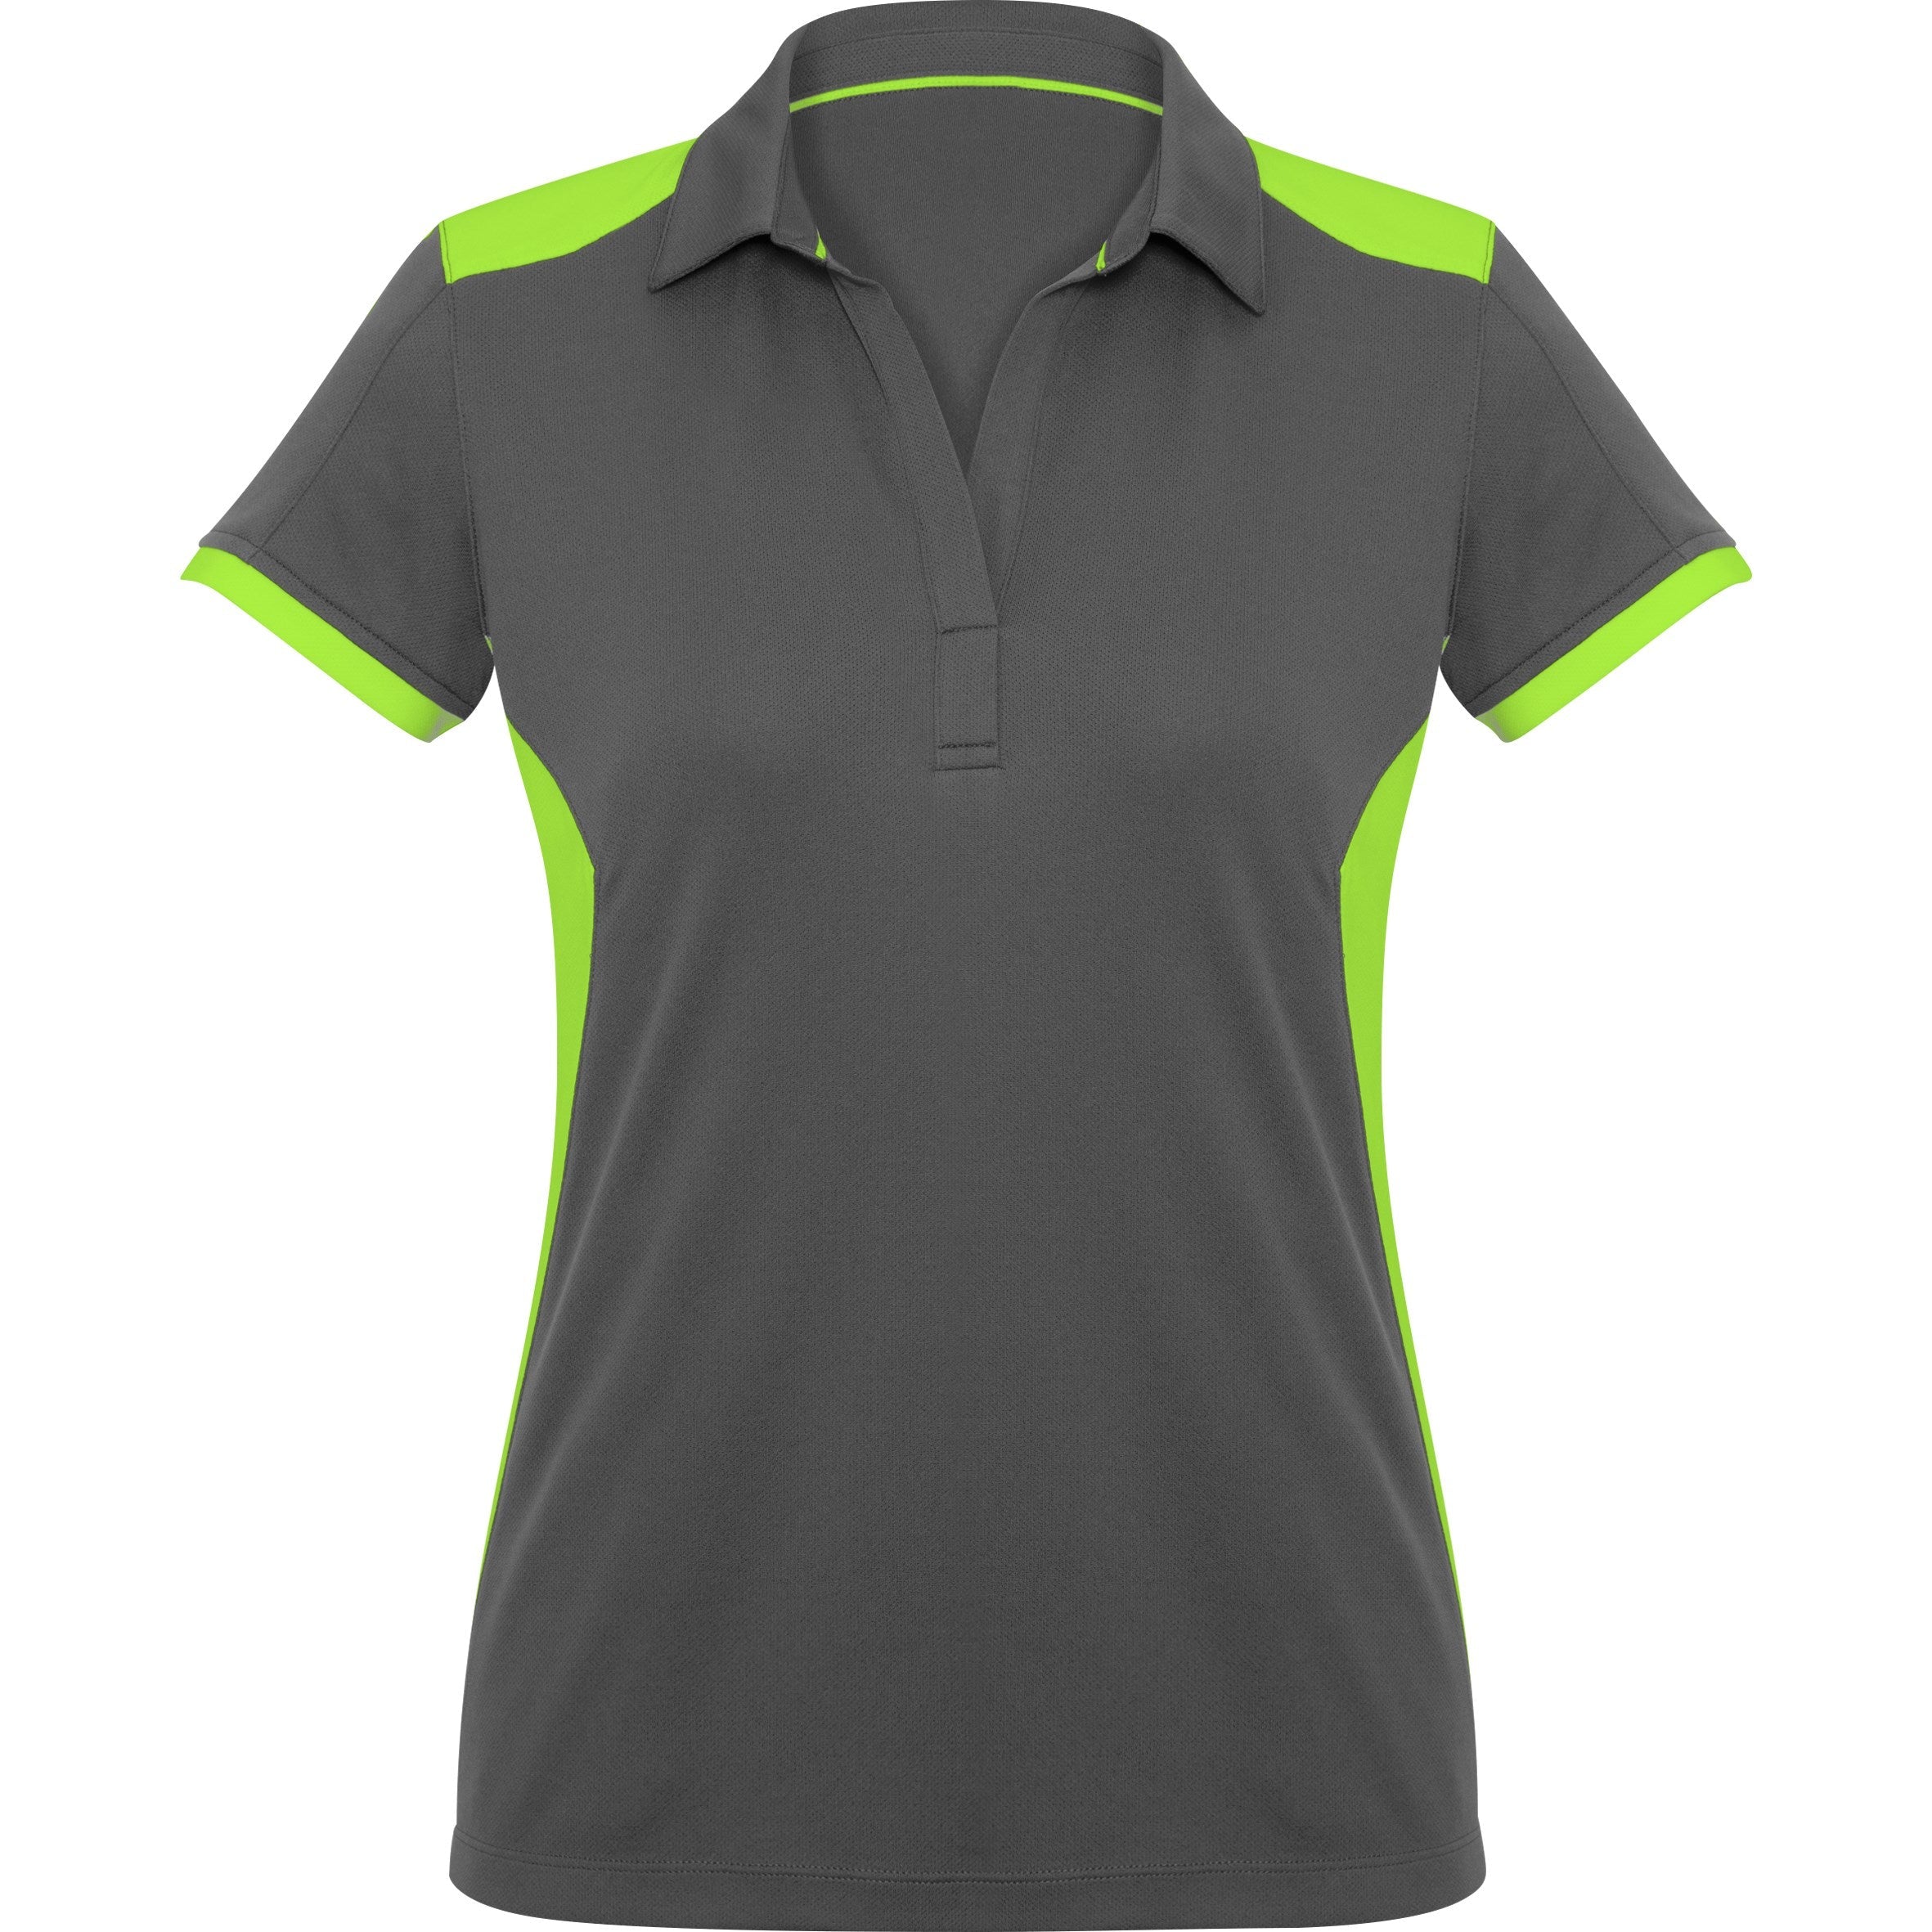 Ladies Rival Golf Shirt - Blue Only-L-Grey with Lime-GYL